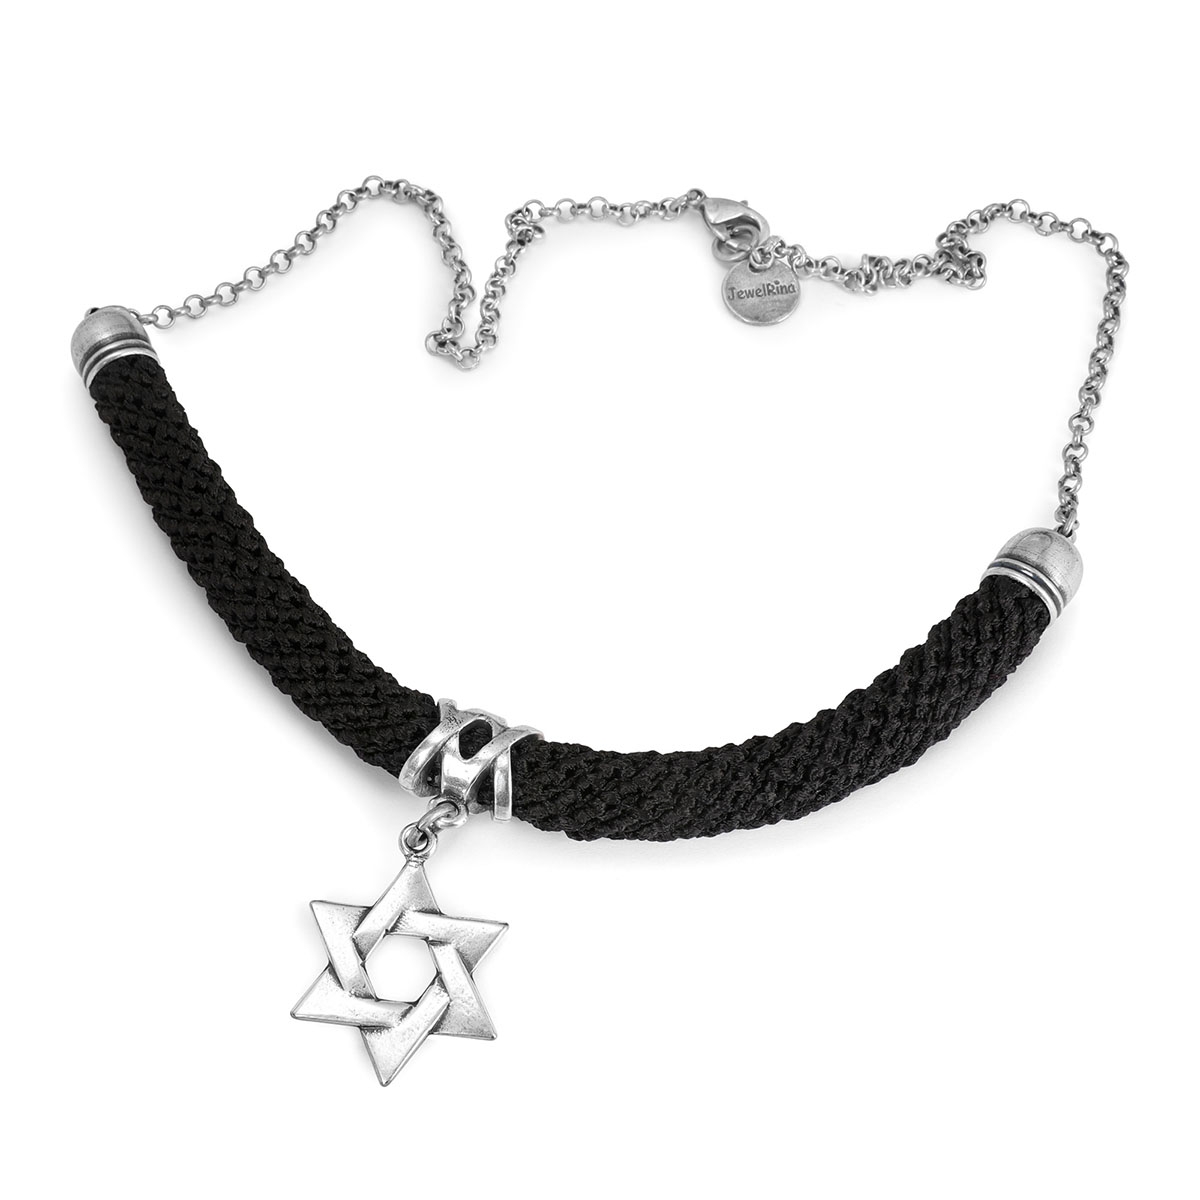 JewelRina Designer Handcrafted Star of David Necklace (Choice of Colors) - 1